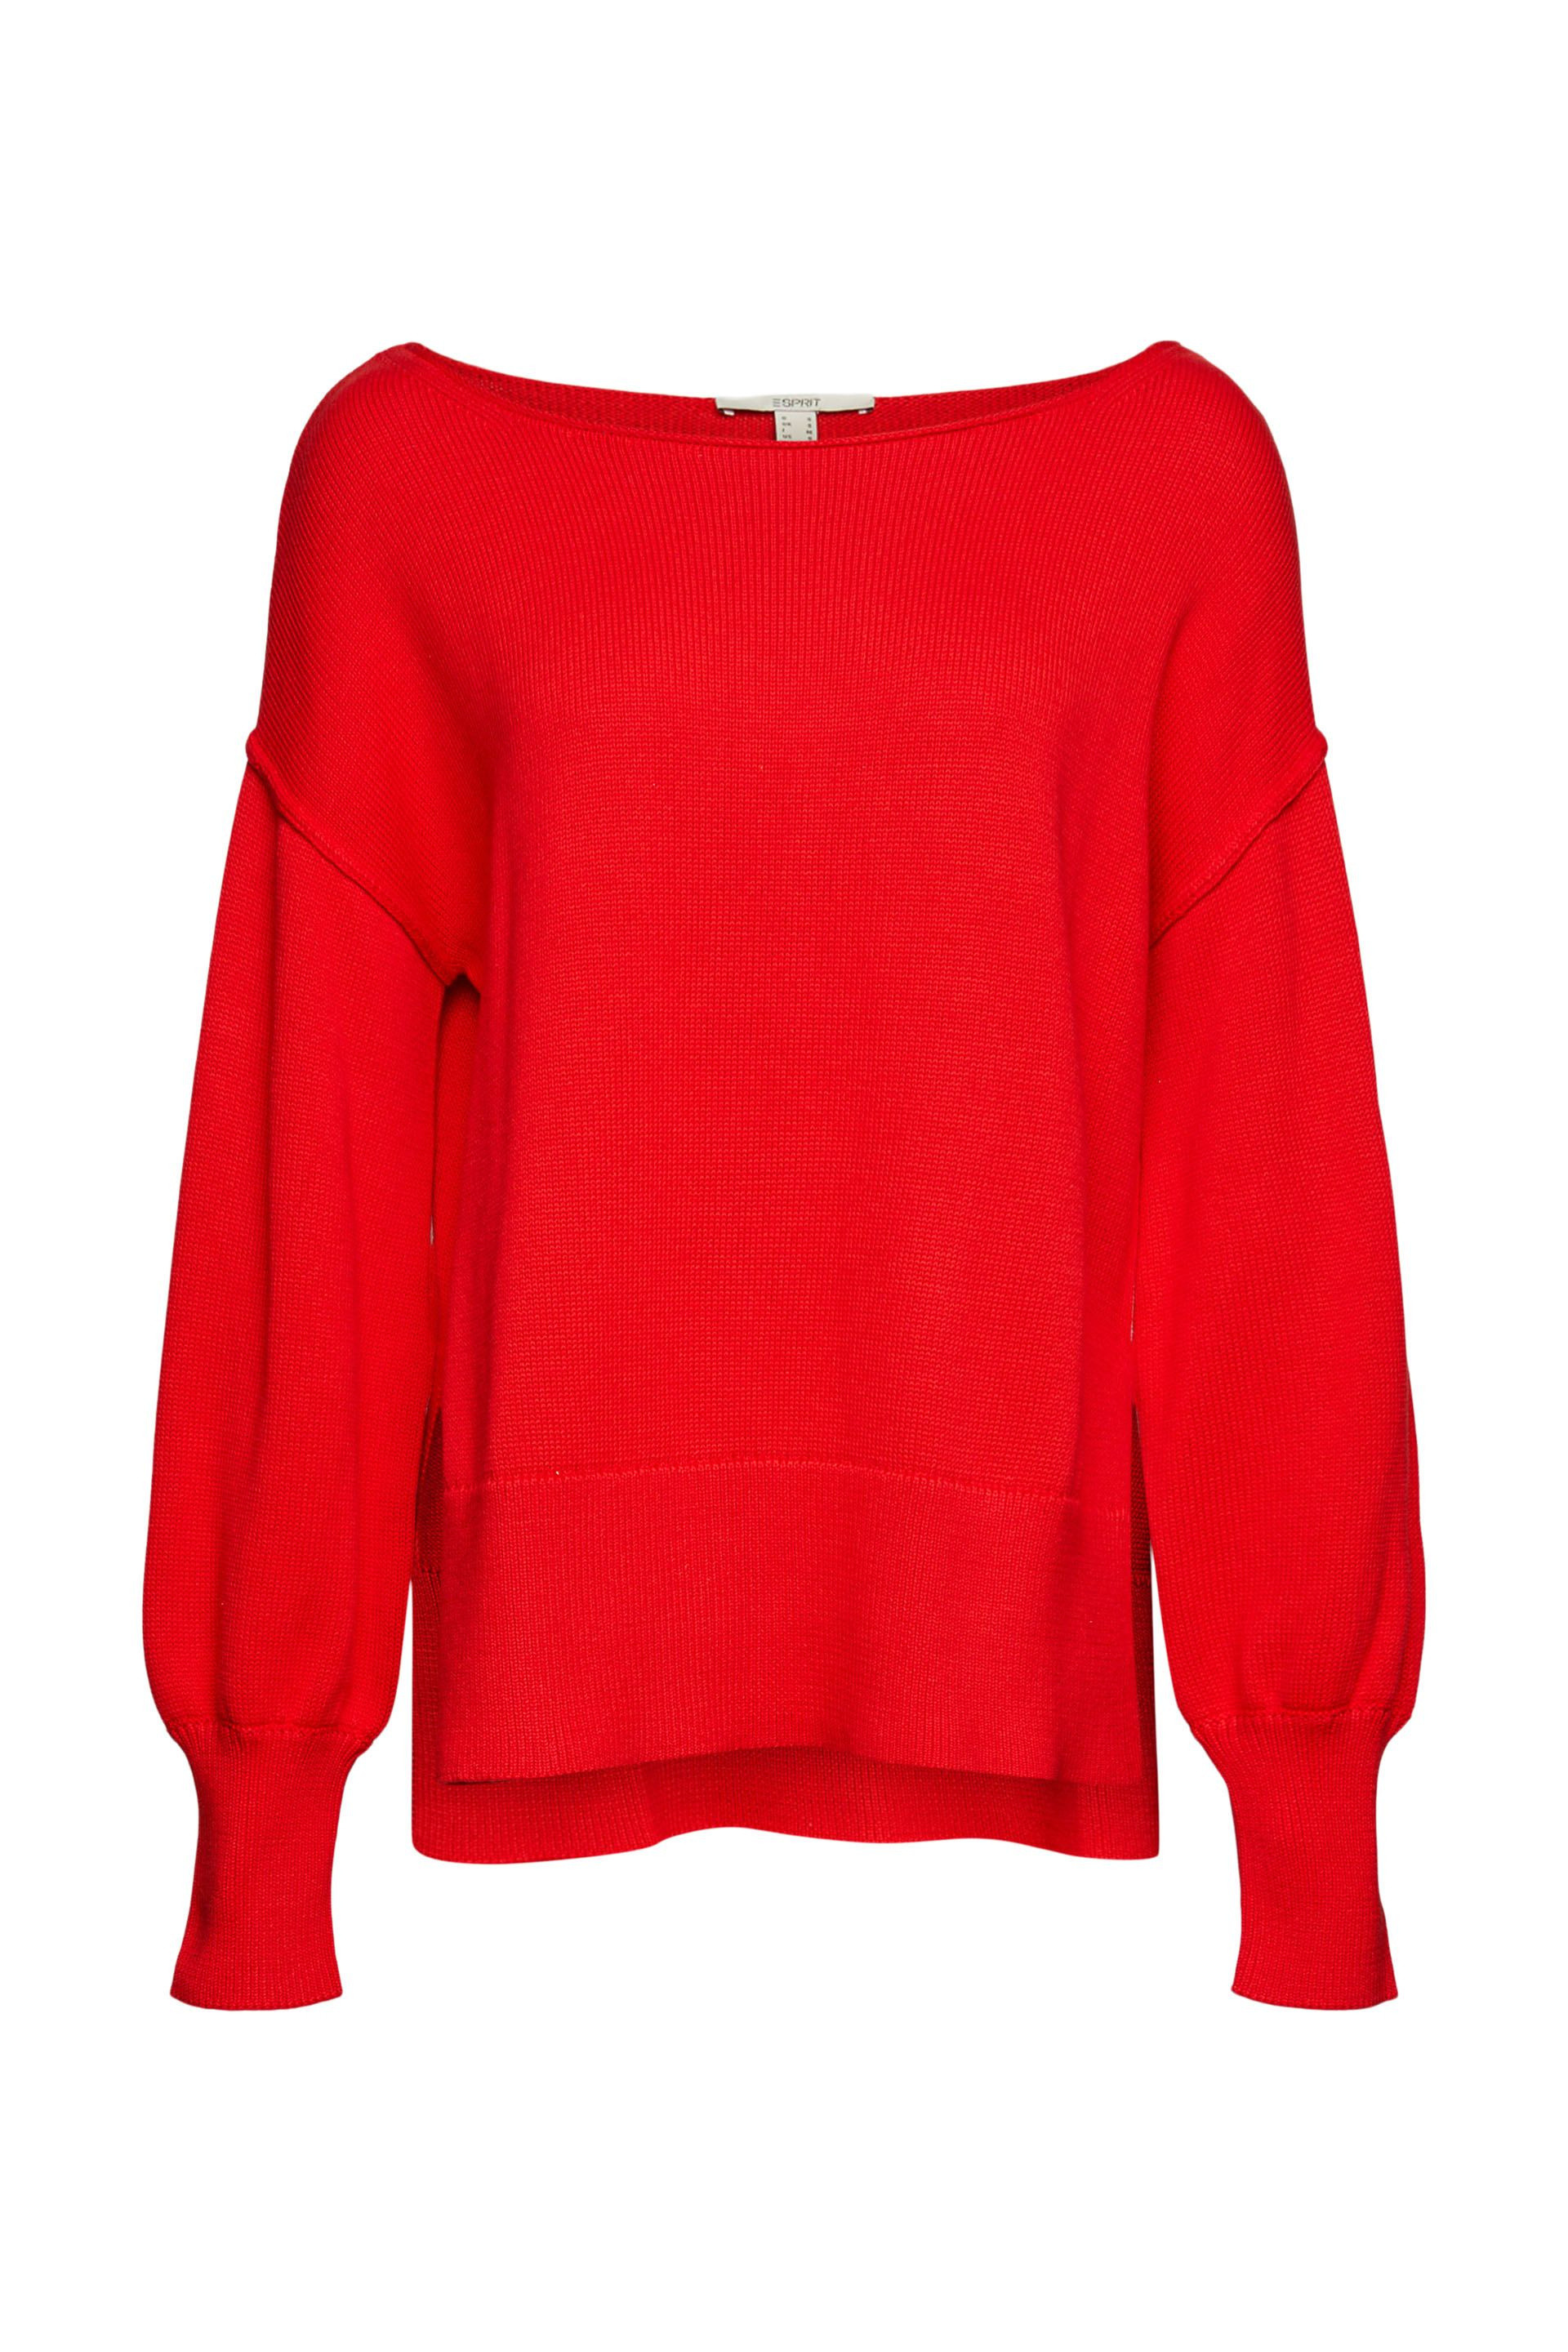 Knitted pullover with slits, Red, large image number 0